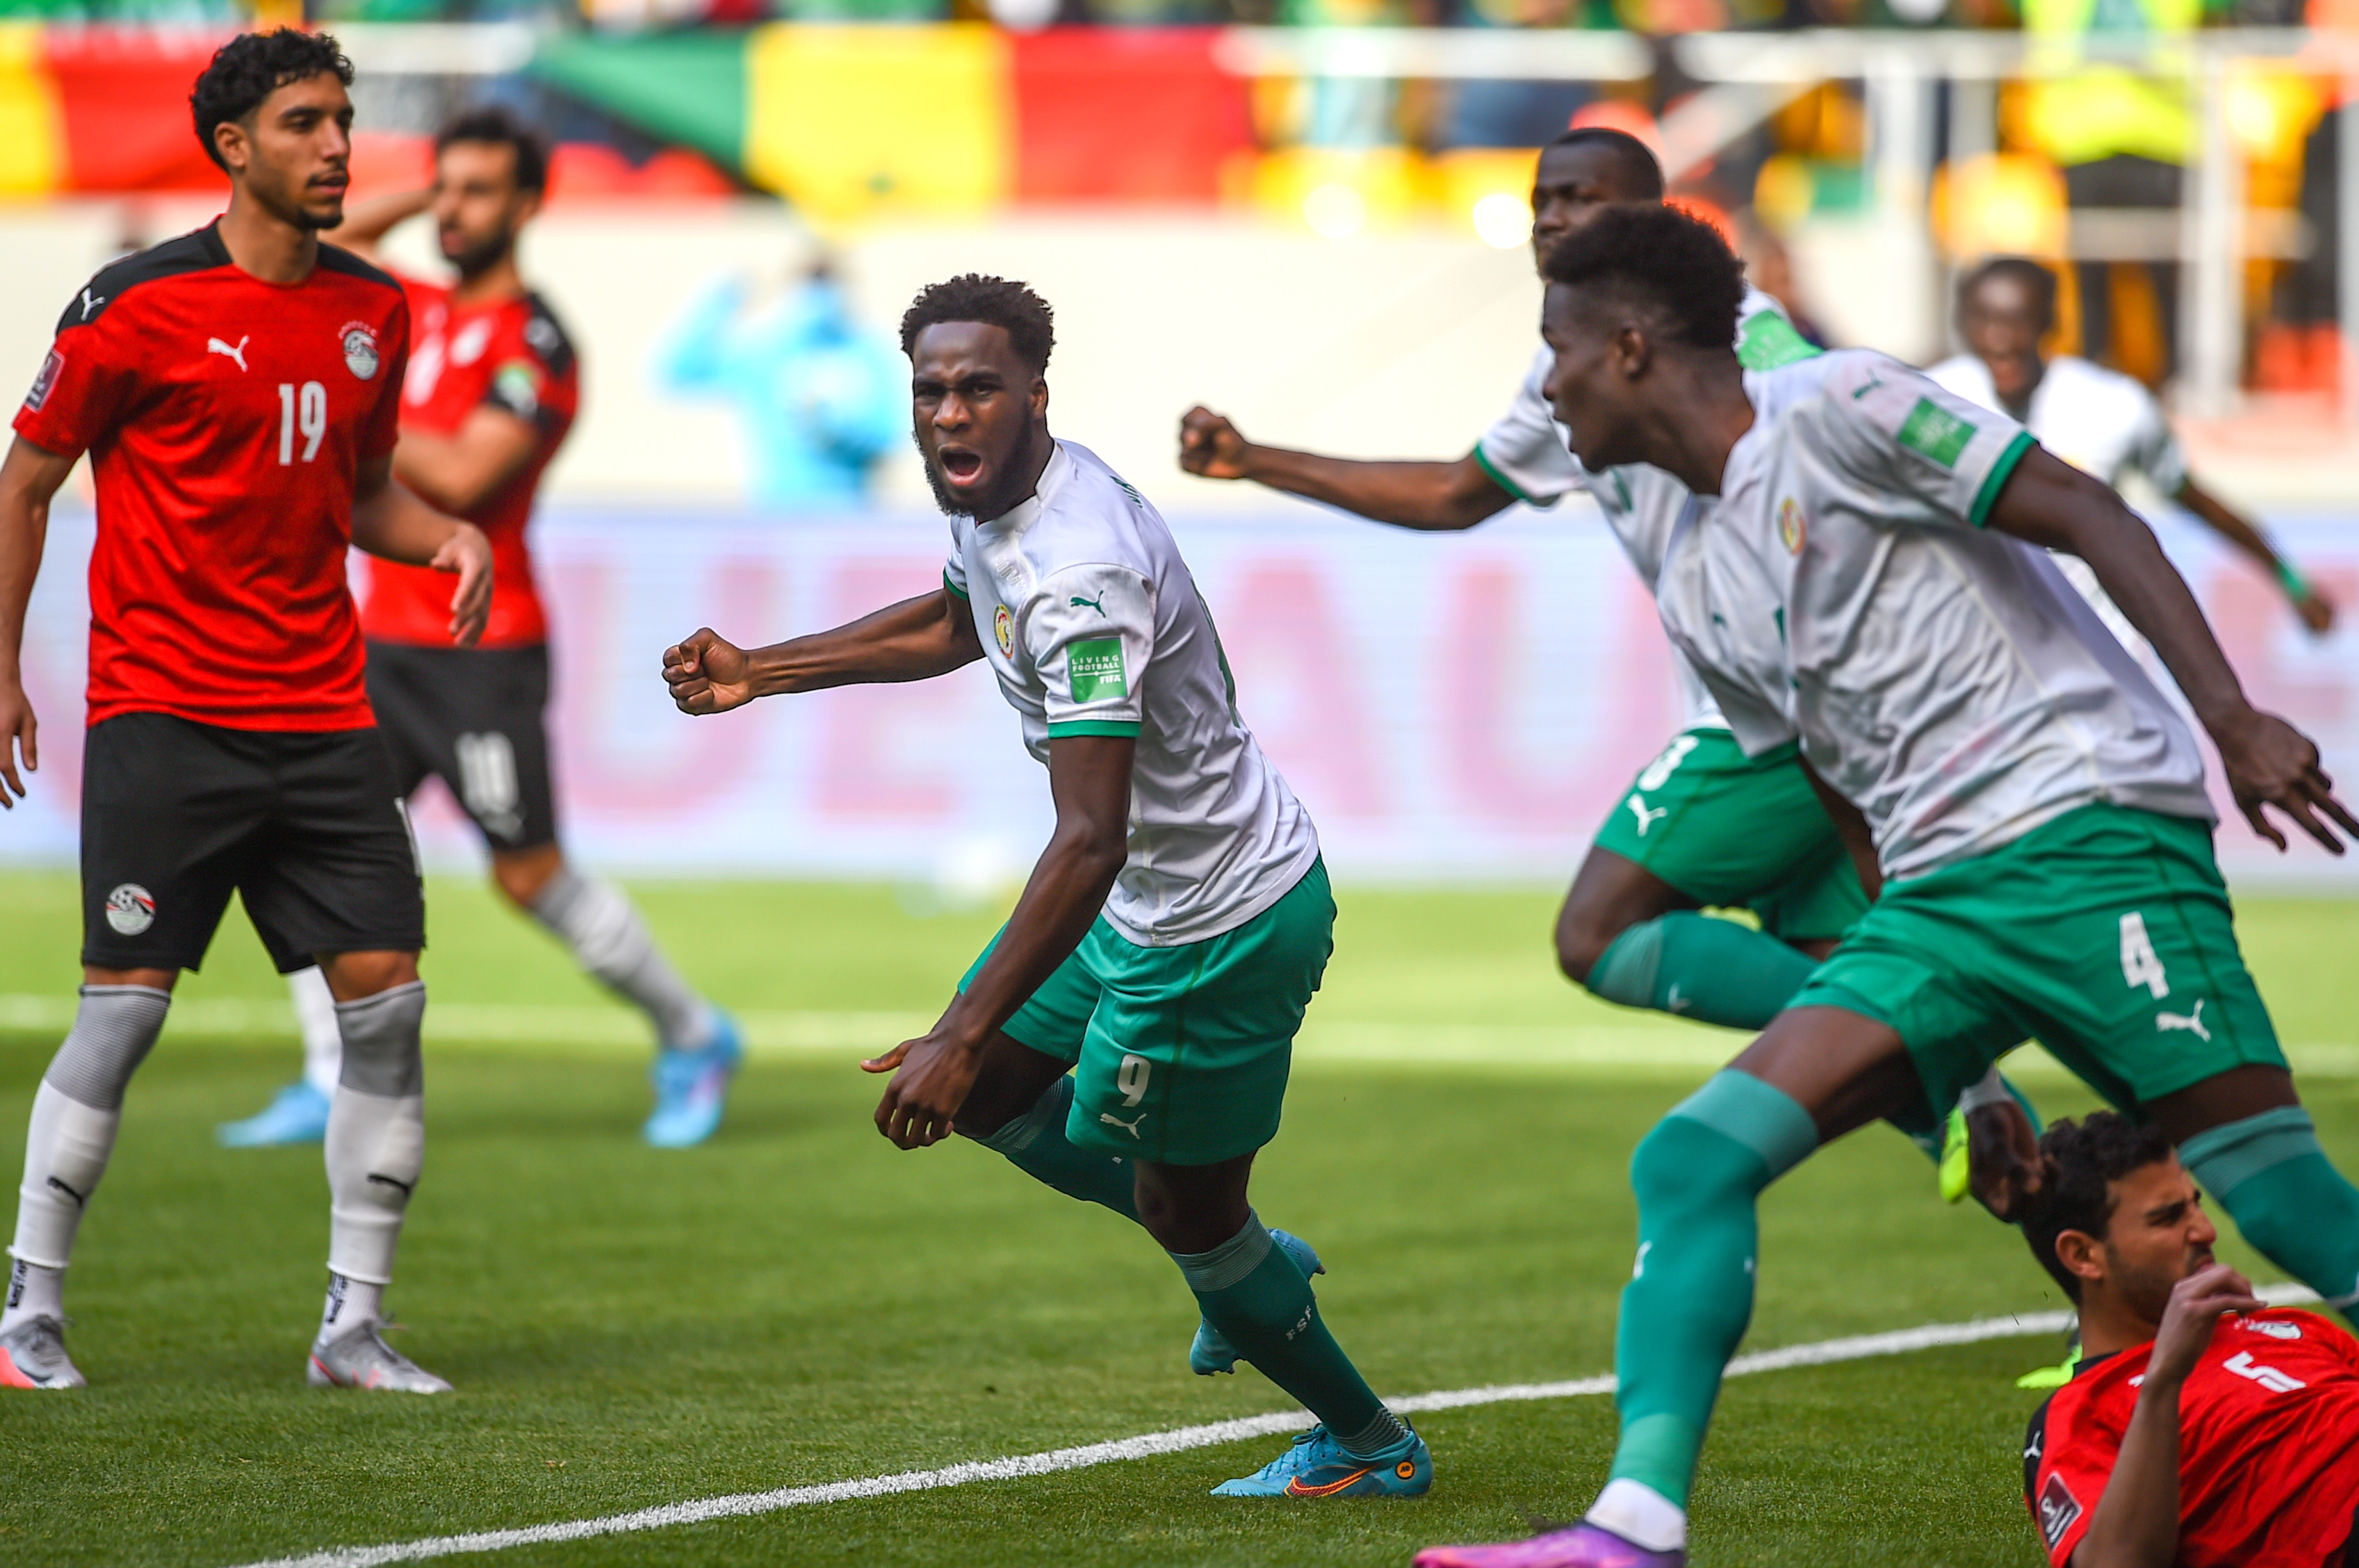 Senegal beat Egypt: Senegal win on penalties once again against Egypt to qualify for the World Cup 2022 in Qatar as Egypt are KNOCKED OUT after Captain Mohamed Salah missed his penalty kick